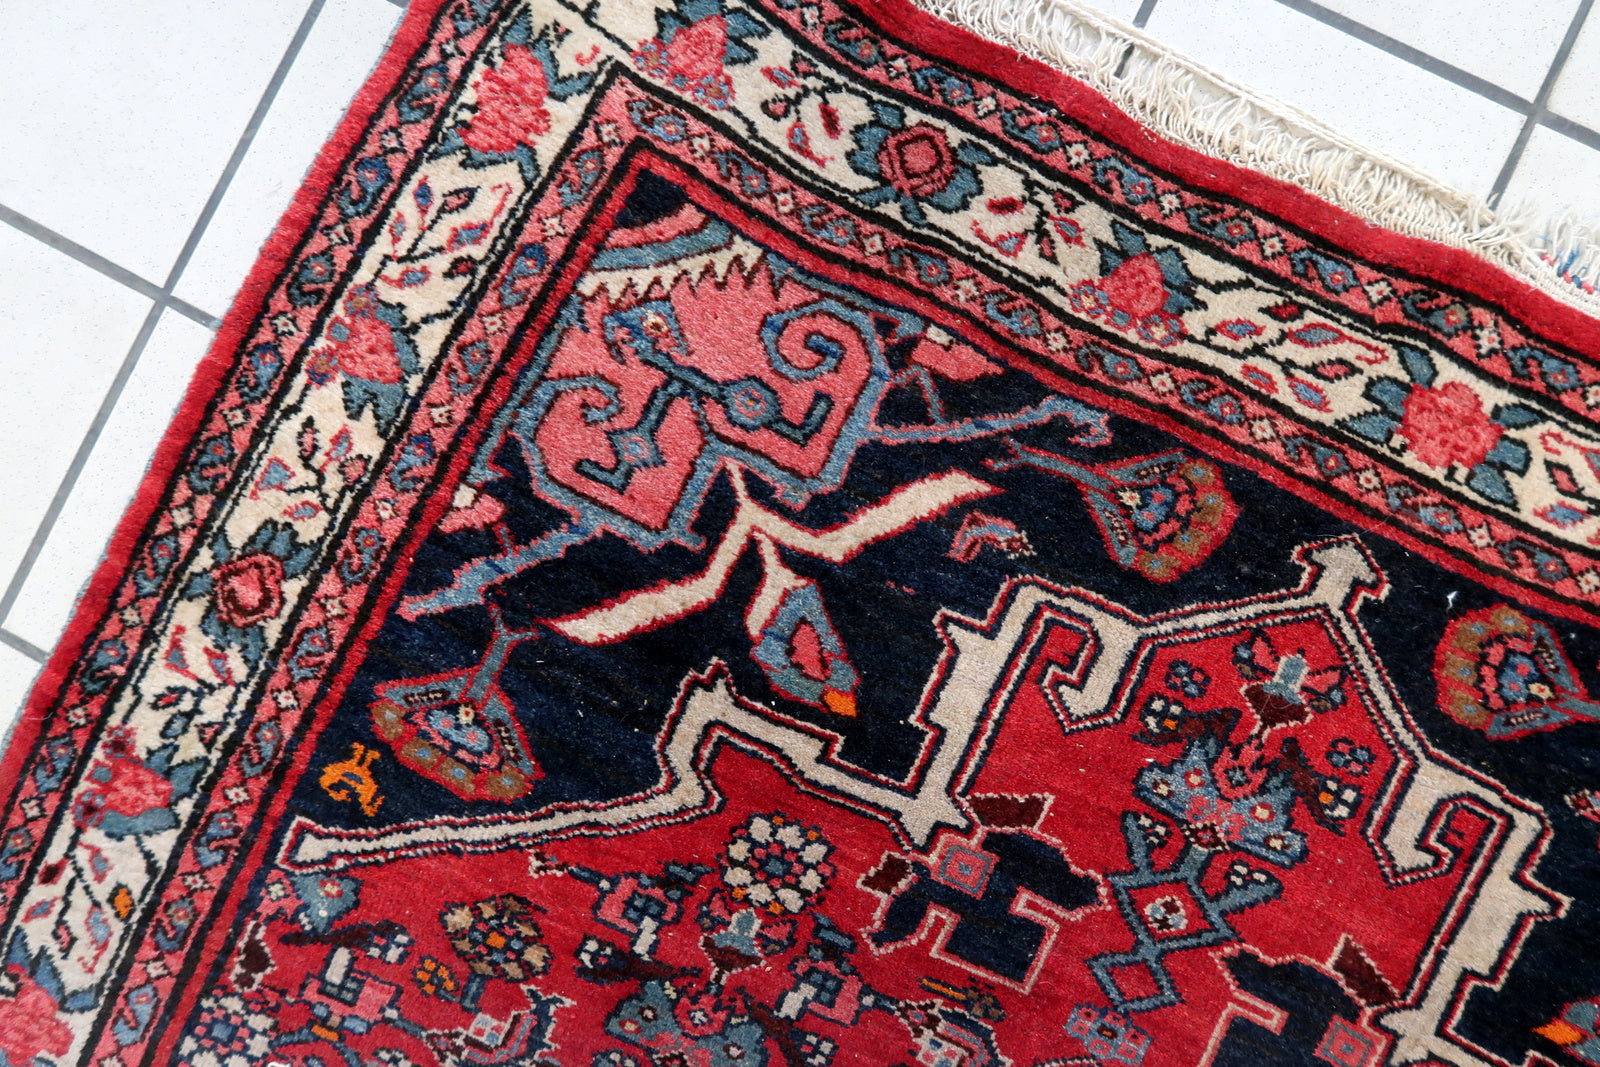 Close-up of intricate floral motifs on Handmade Vintage Persian Bidjar Rug - Detailed view showcasing the detailed floral motifs adding to the rug's charm.